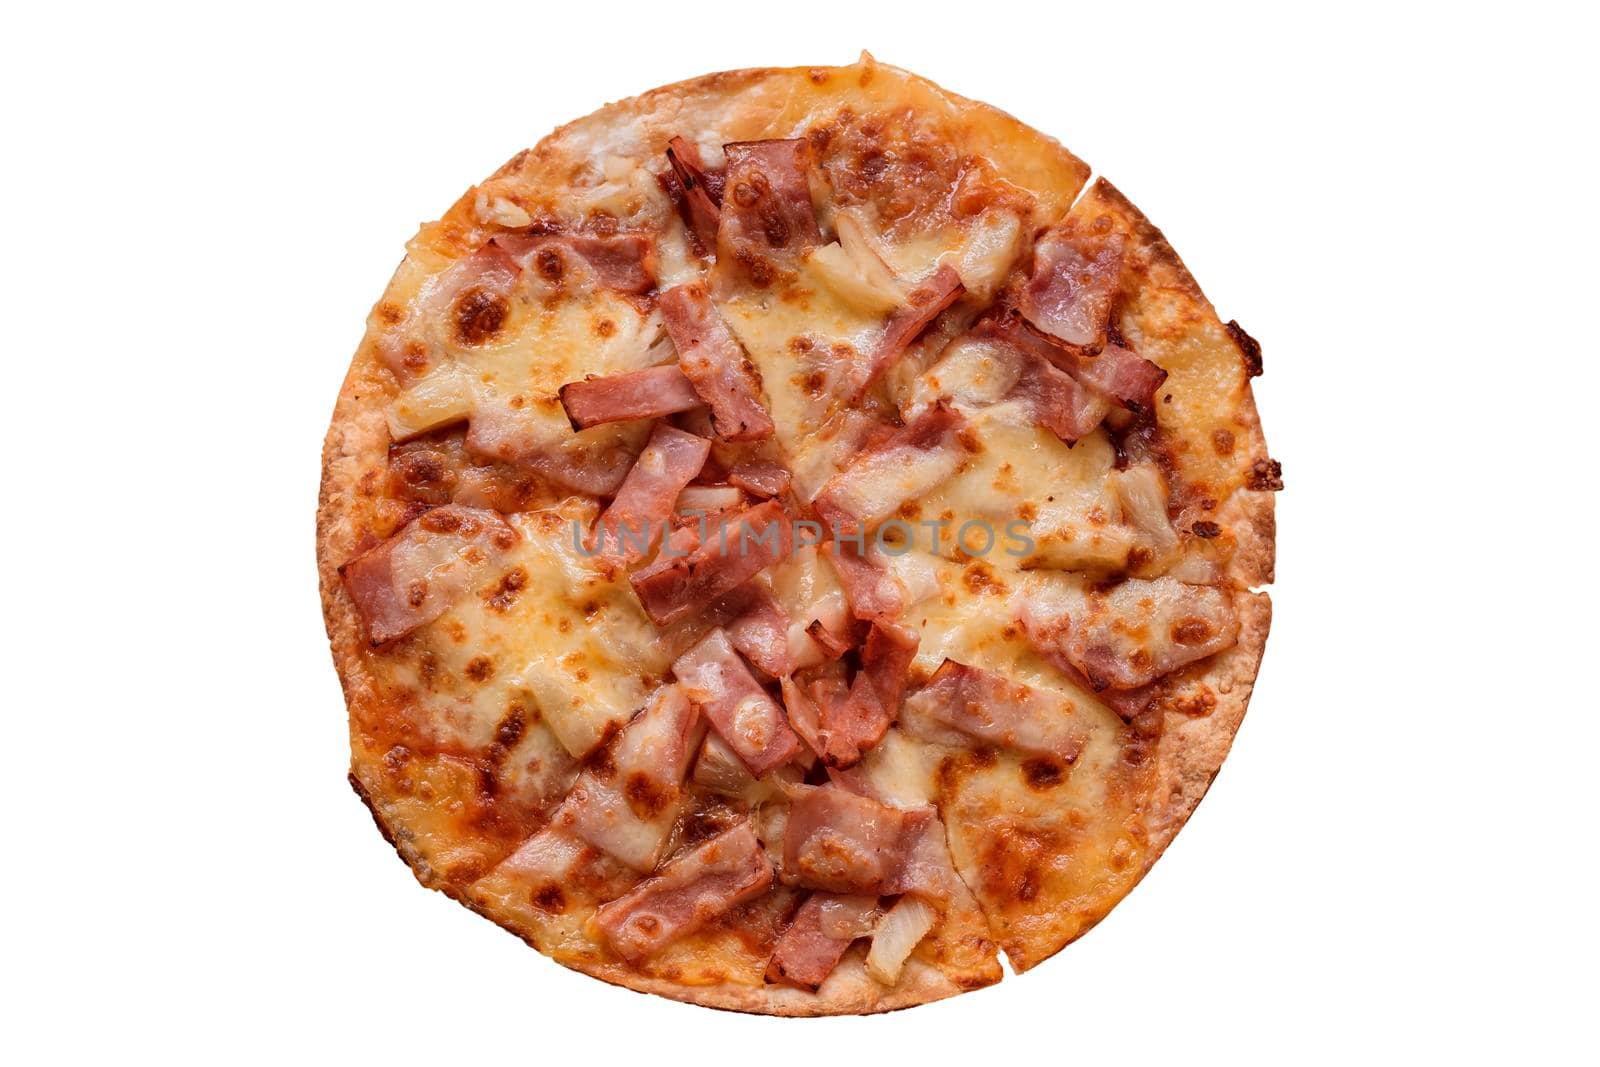 Top view of pizza on a wooden tray isolated on a white background.